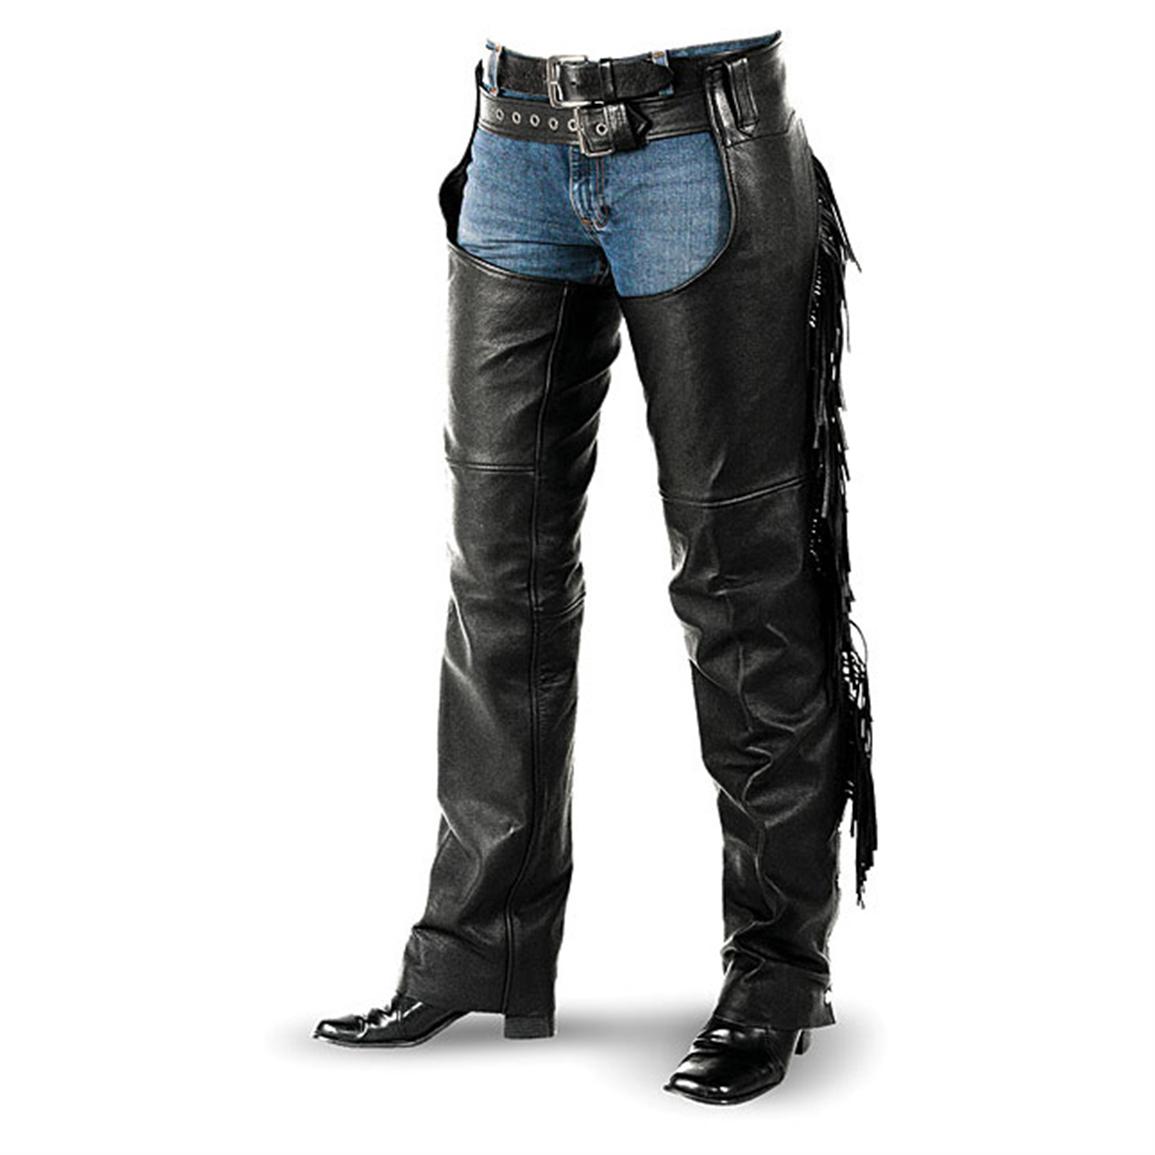 Interstate Leather Womens Fringe Chaps 149106 Jeans Pants And Shorts